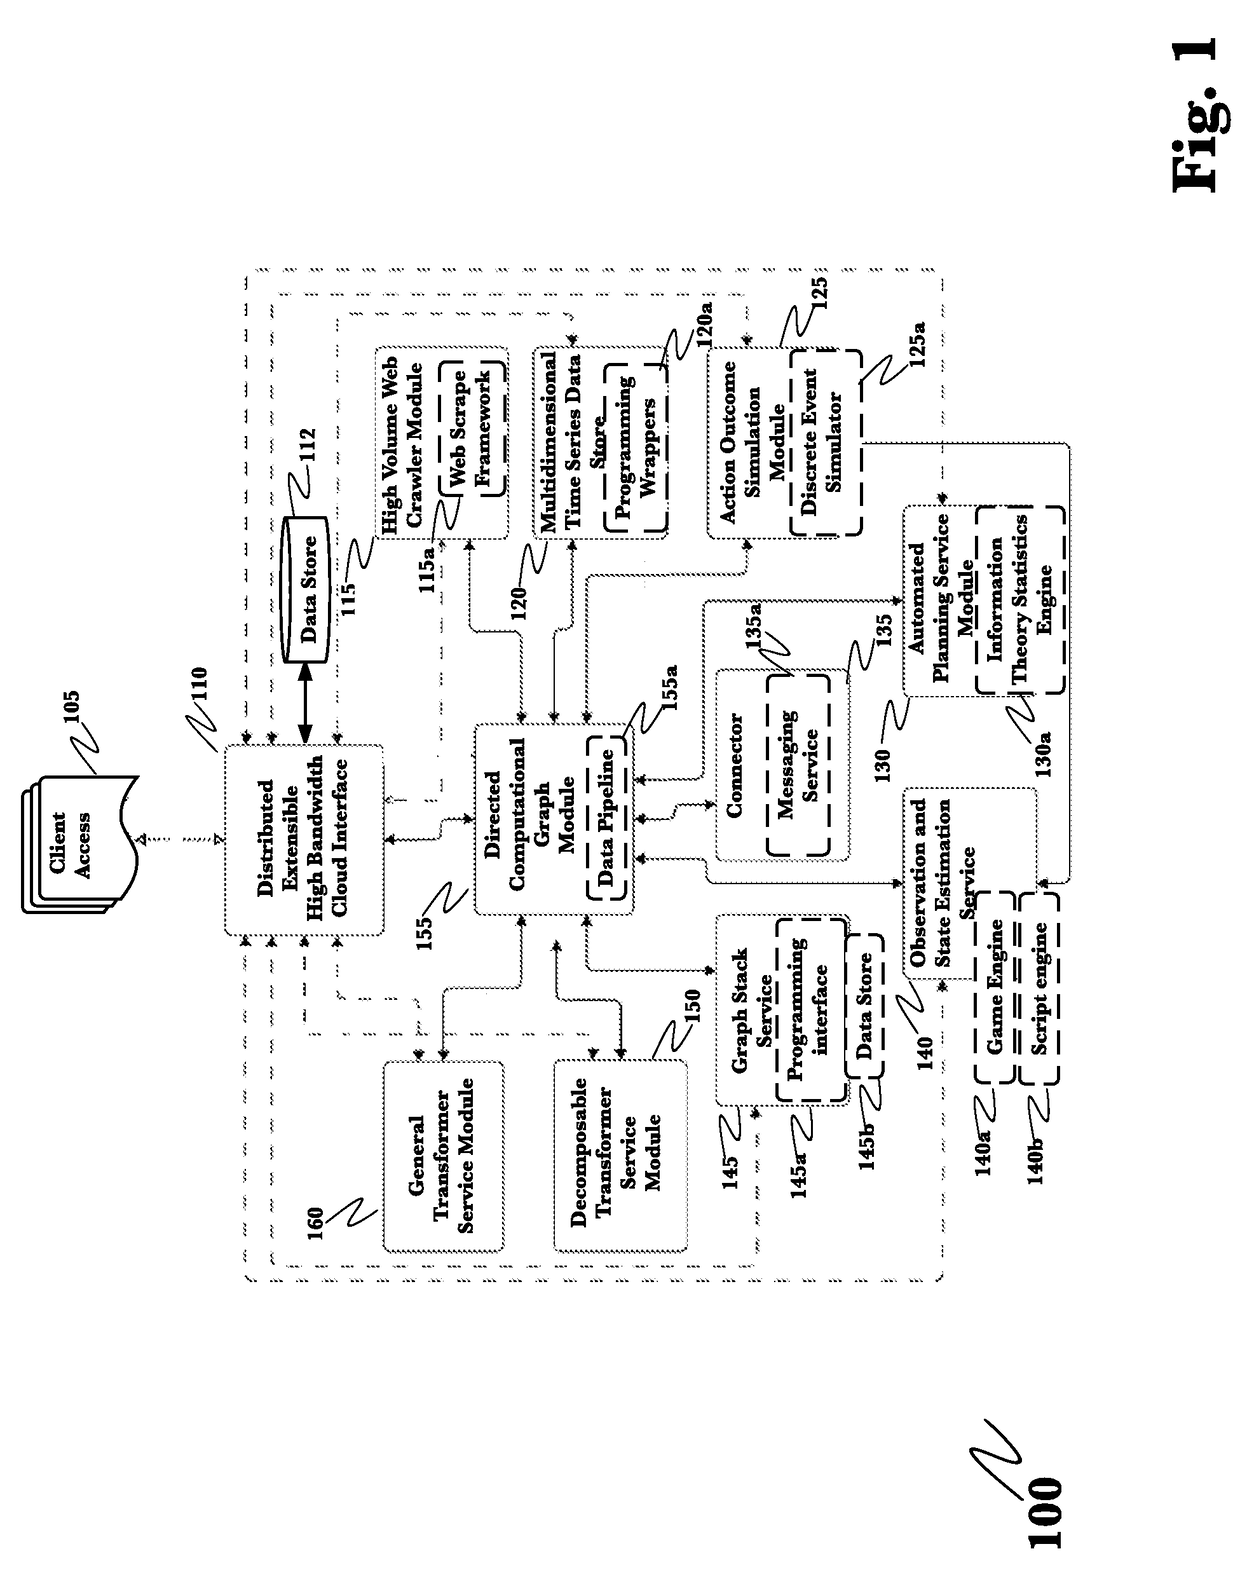 System for automated capture and analysis of business information for reliable business venture outcome prediction